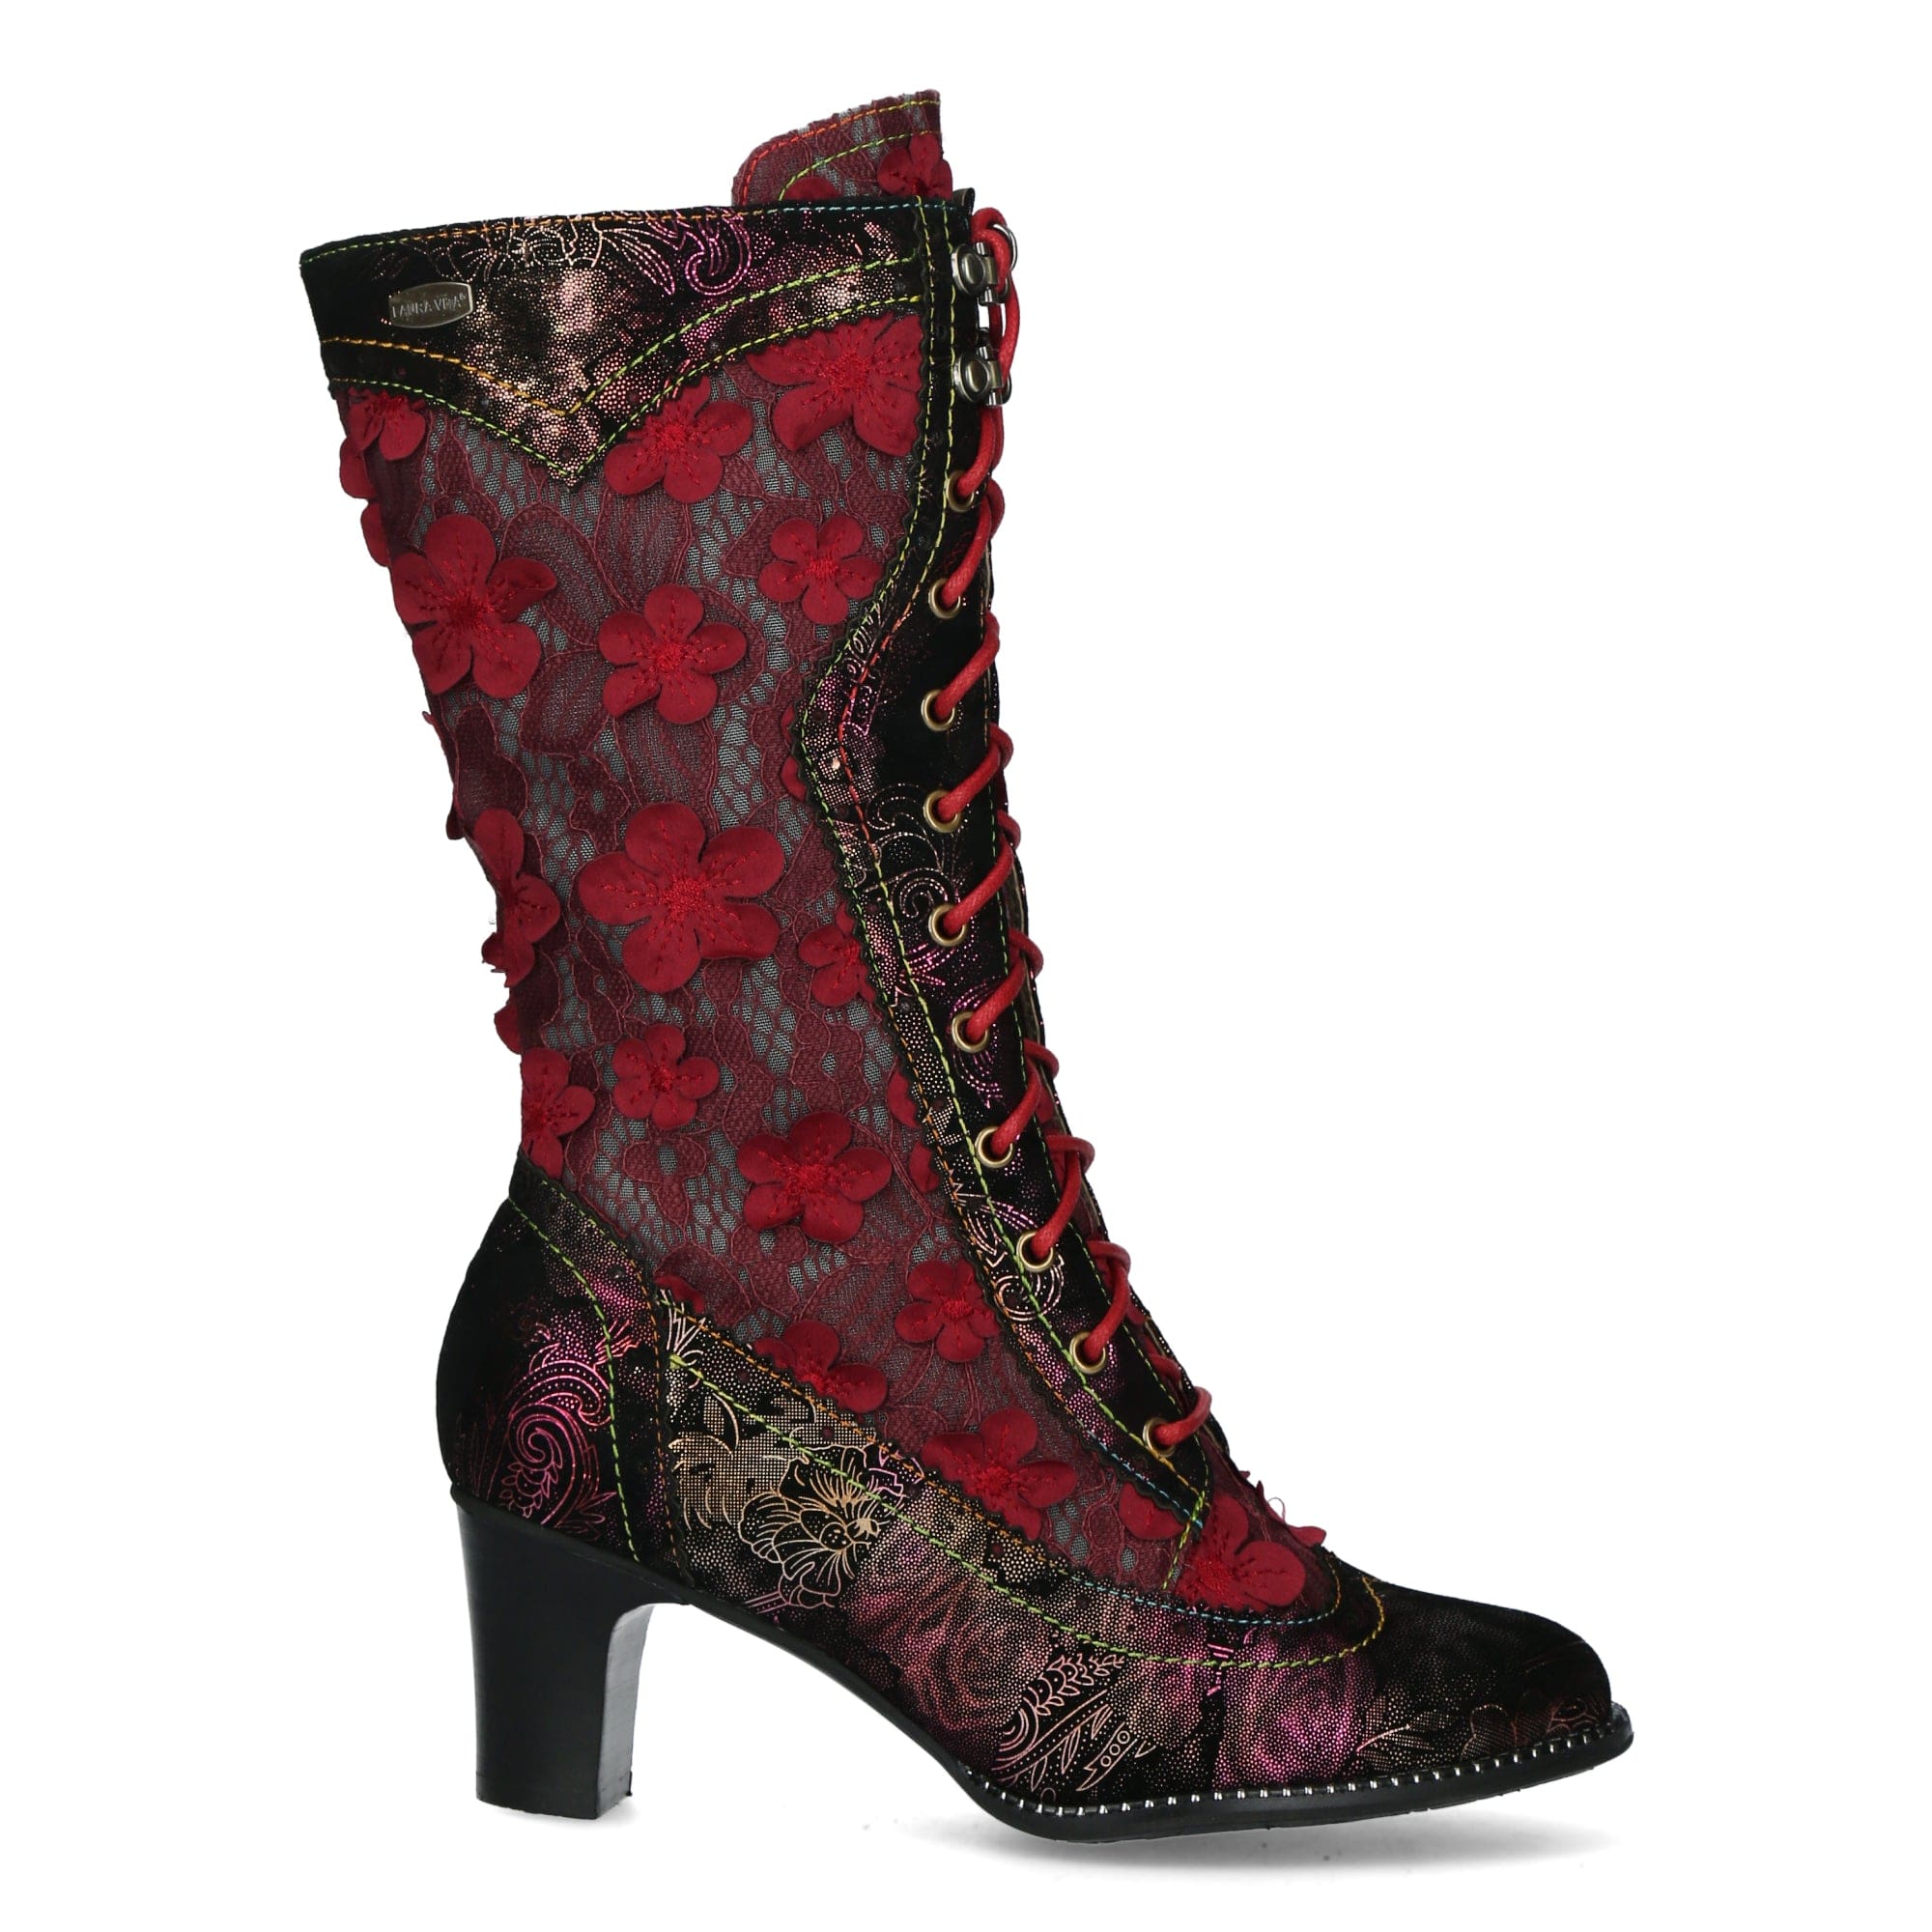 ELCODIEO 09 - 35 / Red - Boot